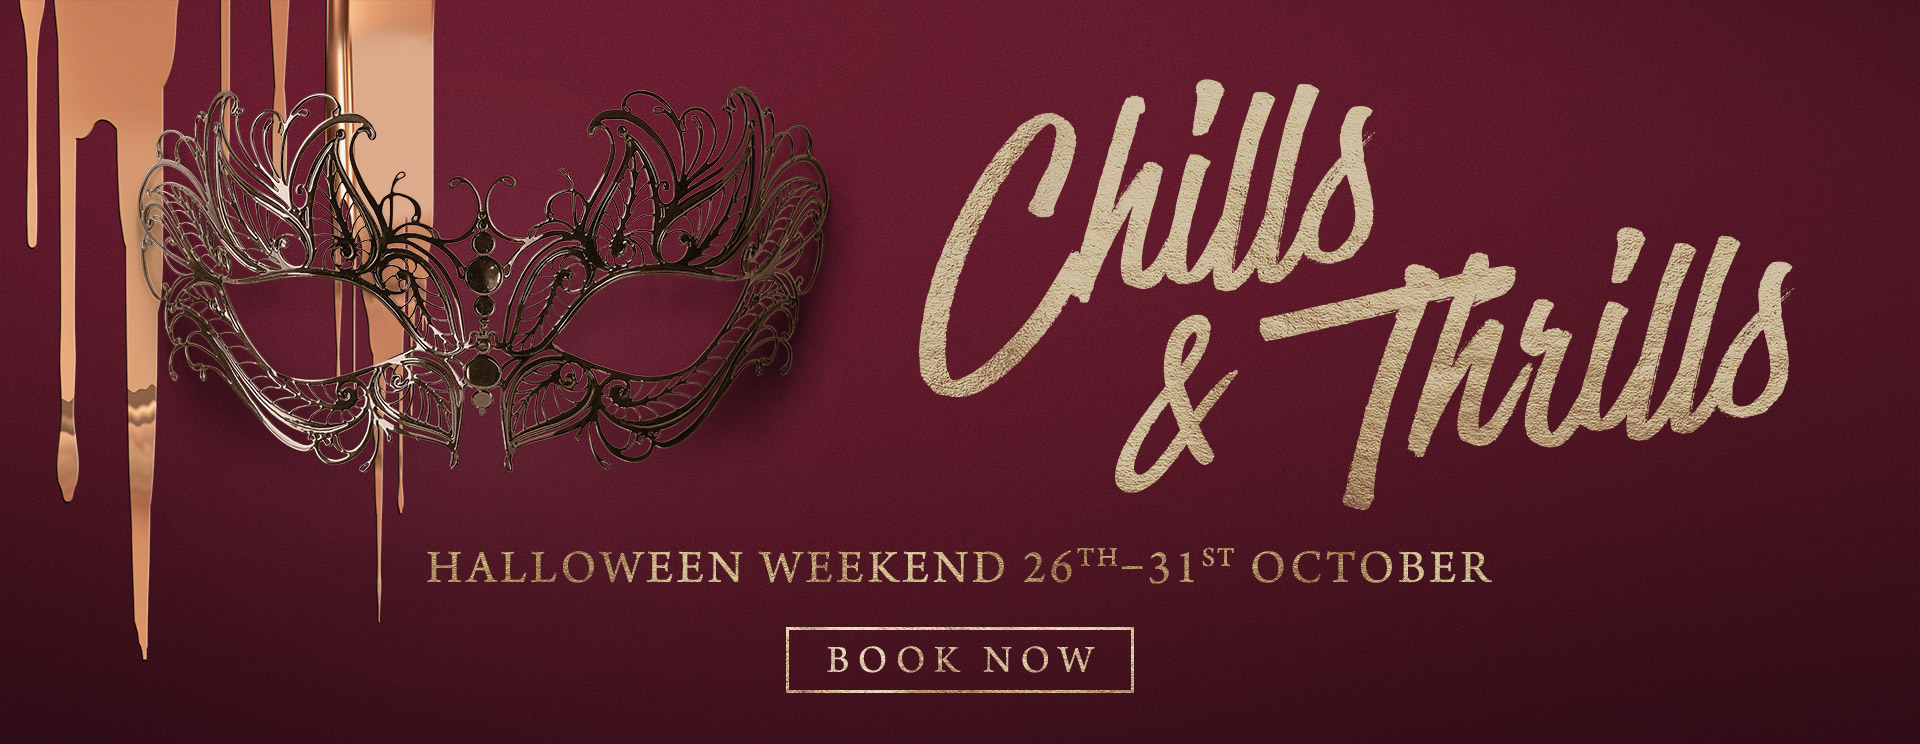 Chills & Thrills this Halloween at The Rambler's Rest